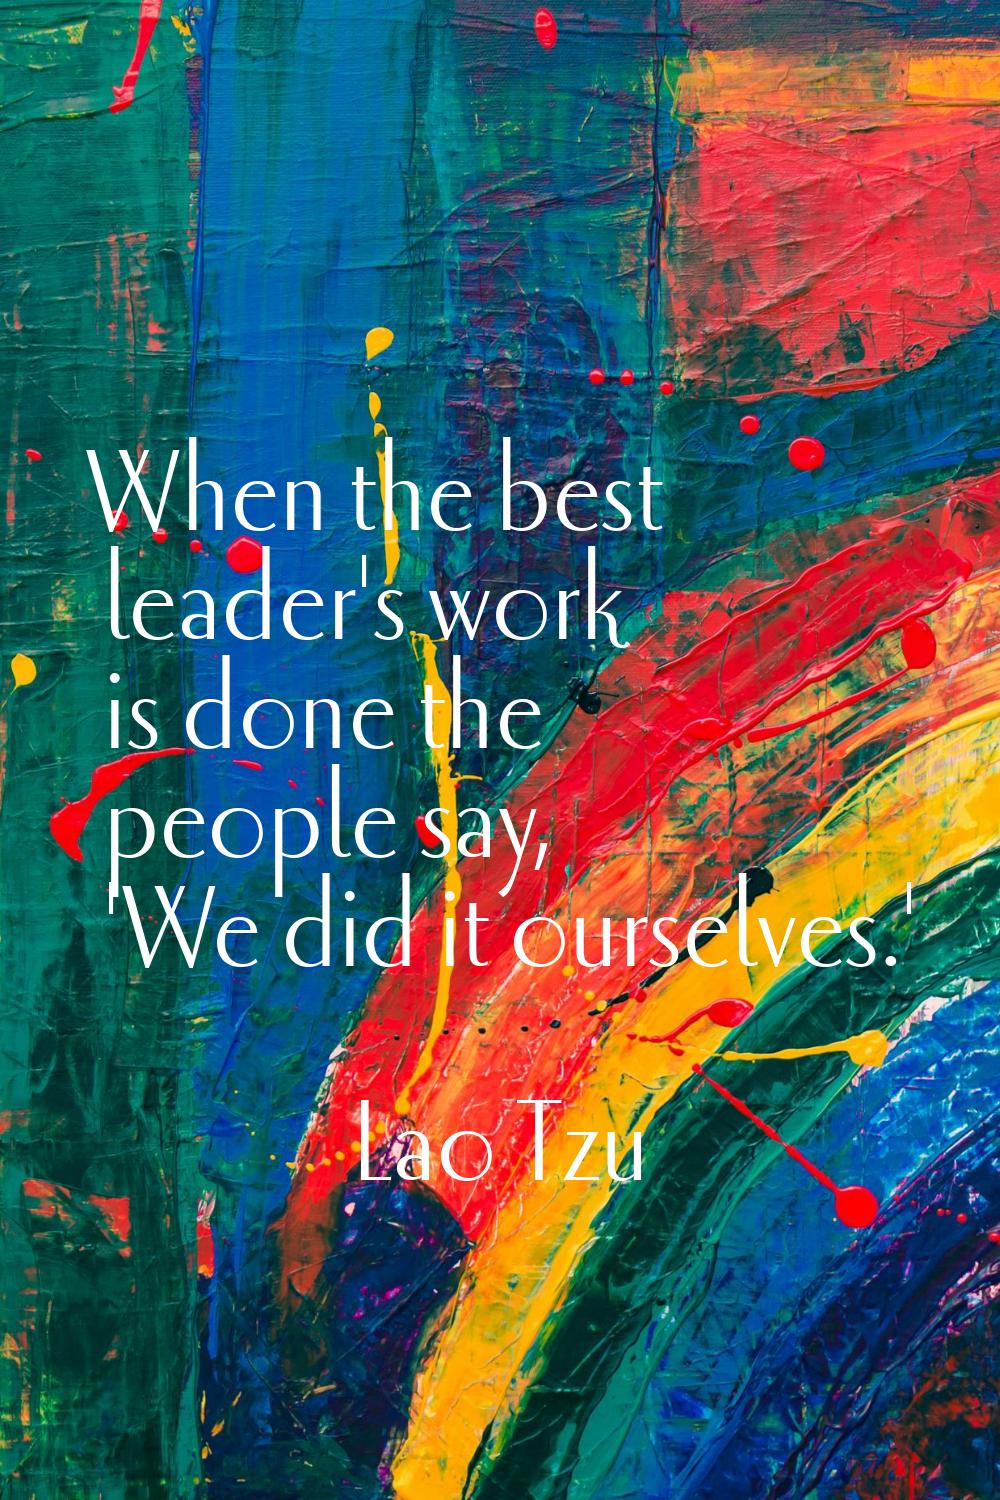 When the best leader's work is done the people say, 'We did it ourselves.'